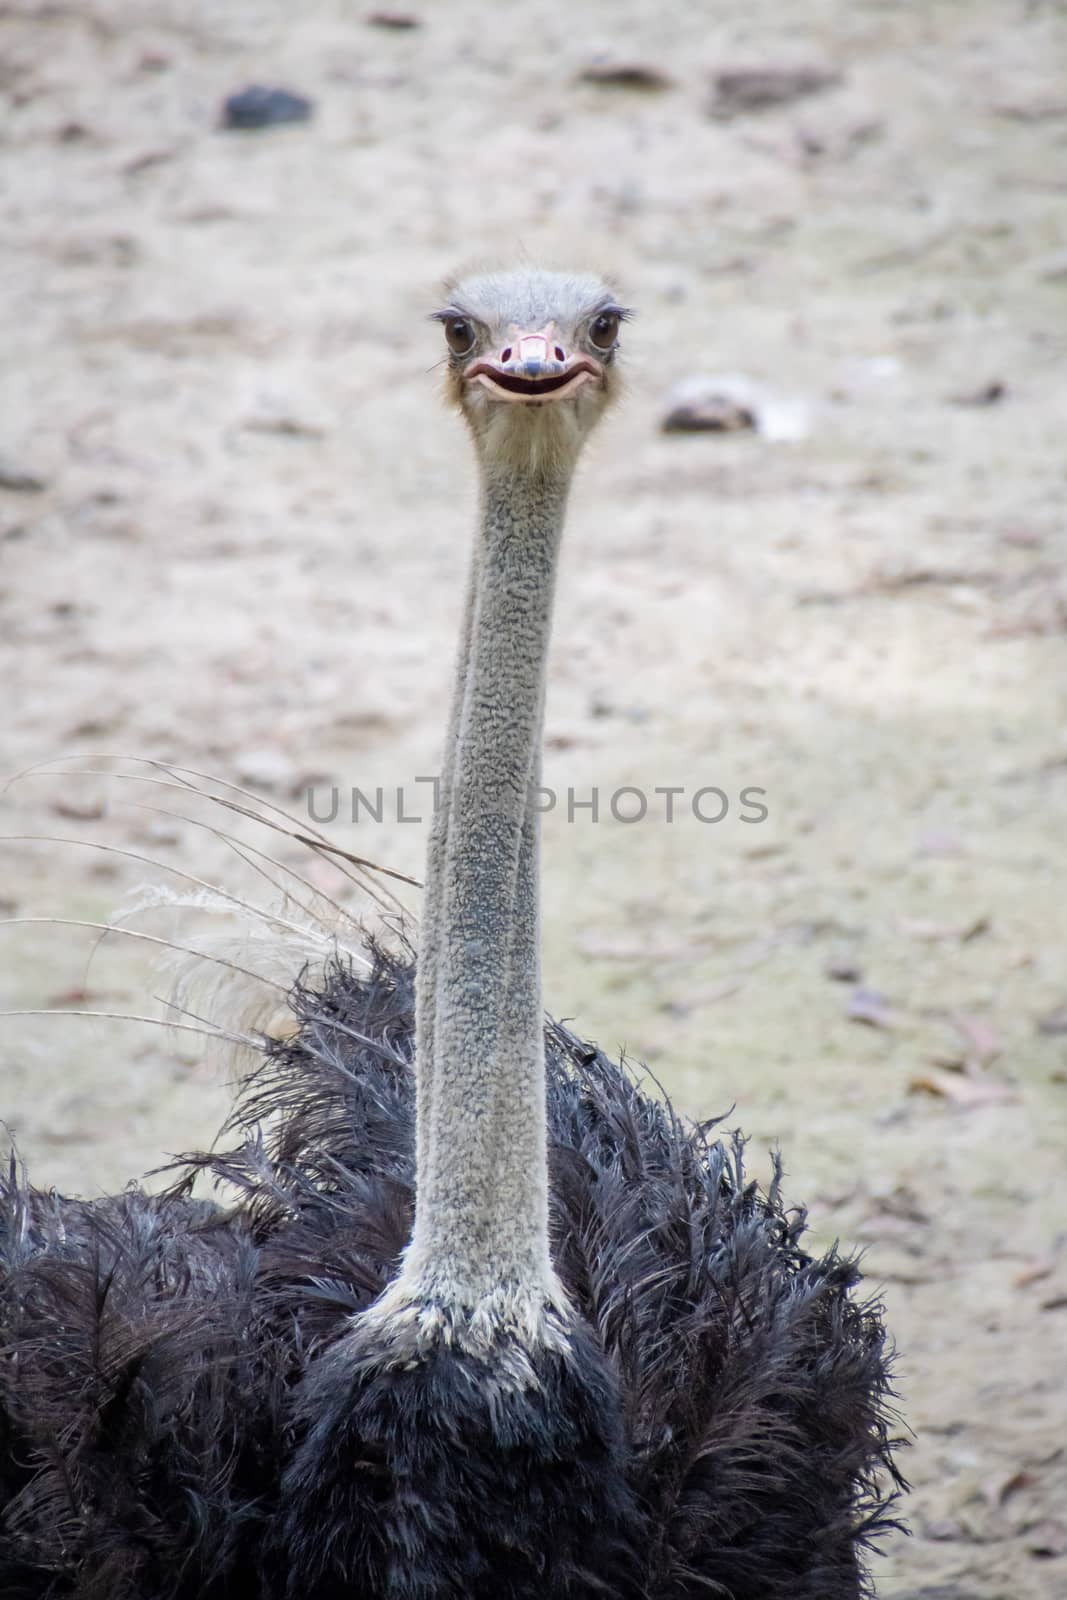 Ostrich bird with dark feathers and long neck looking into the camera